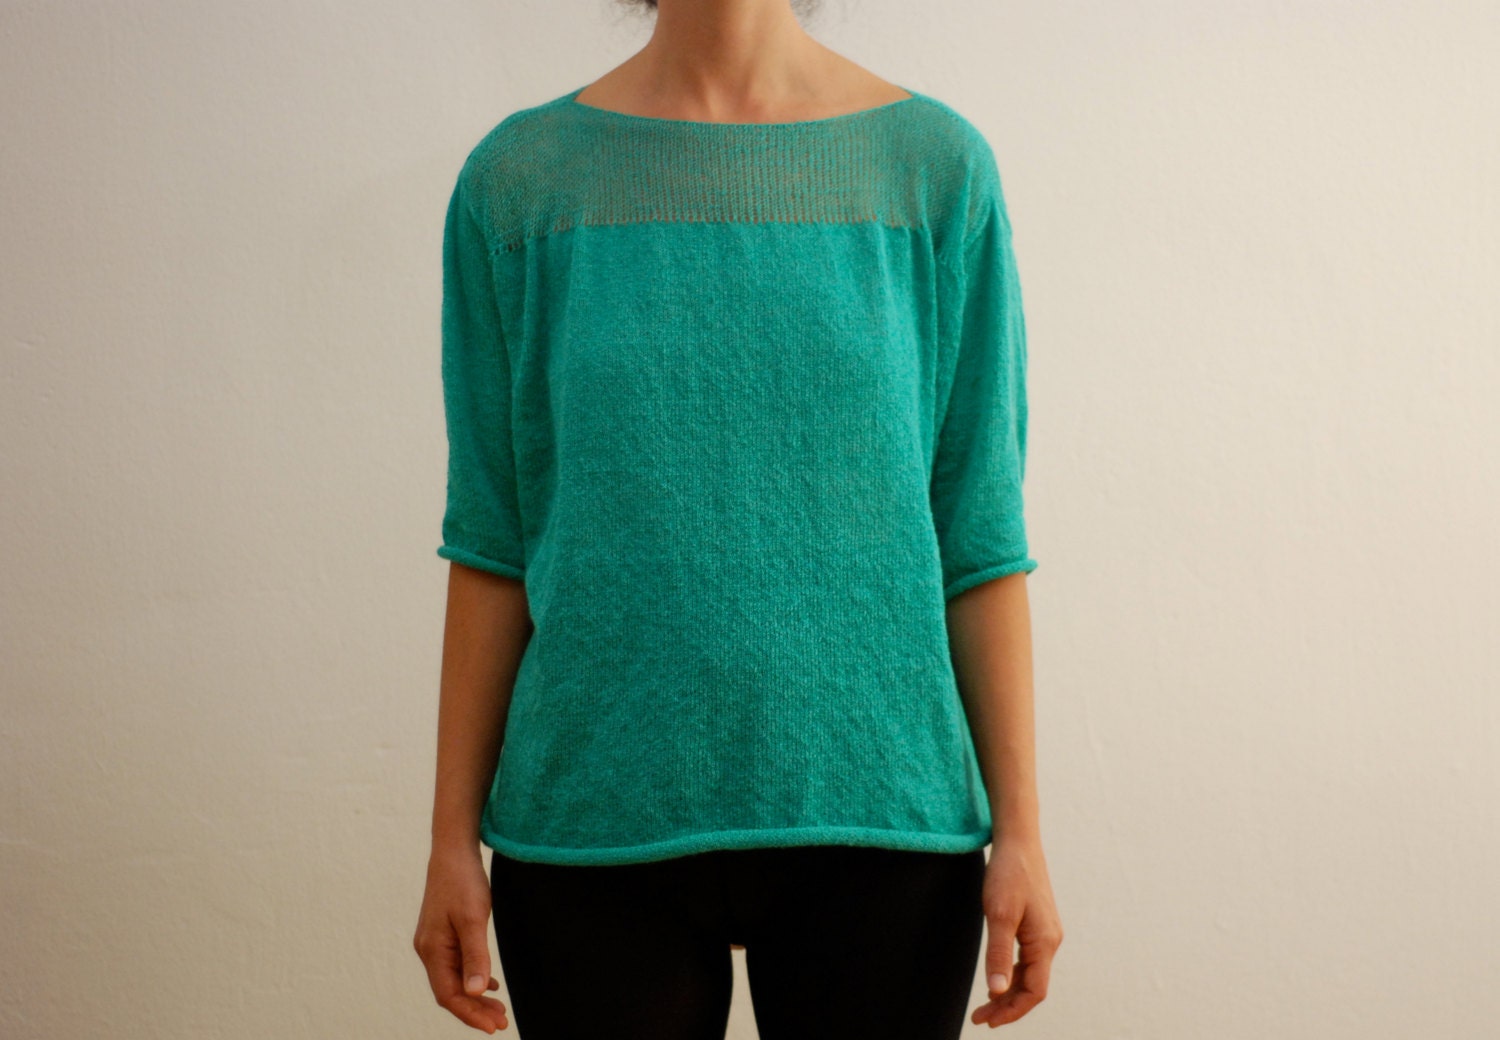 Oversize knitted sweater - ACANTHA in Turquoise - ZORRAshop